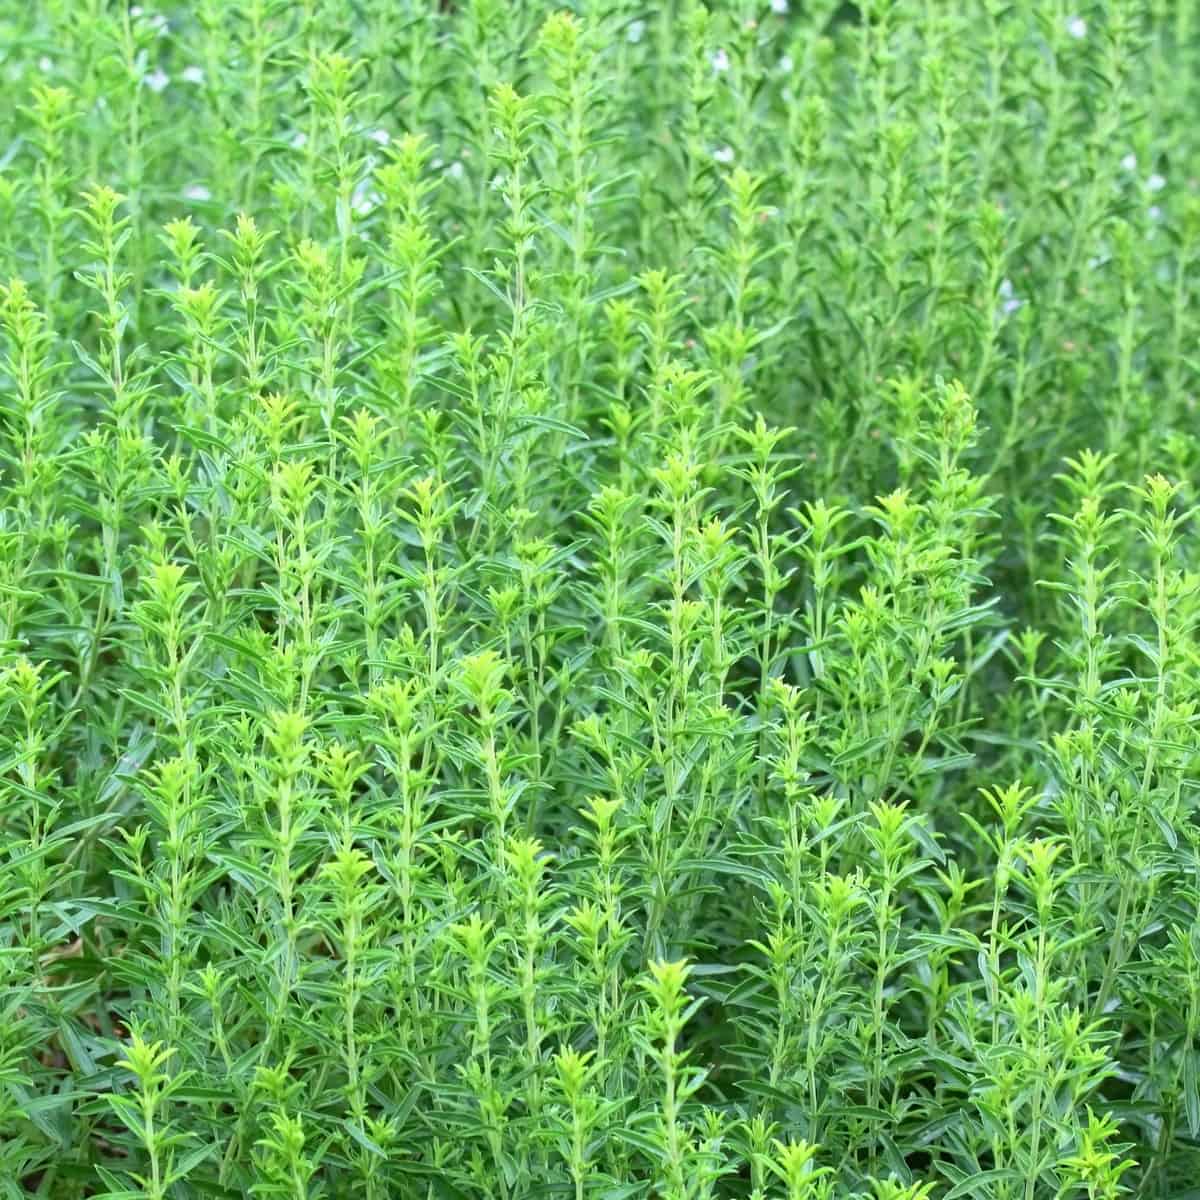 winter savory is a perennial herb that can be used like salt and pepper